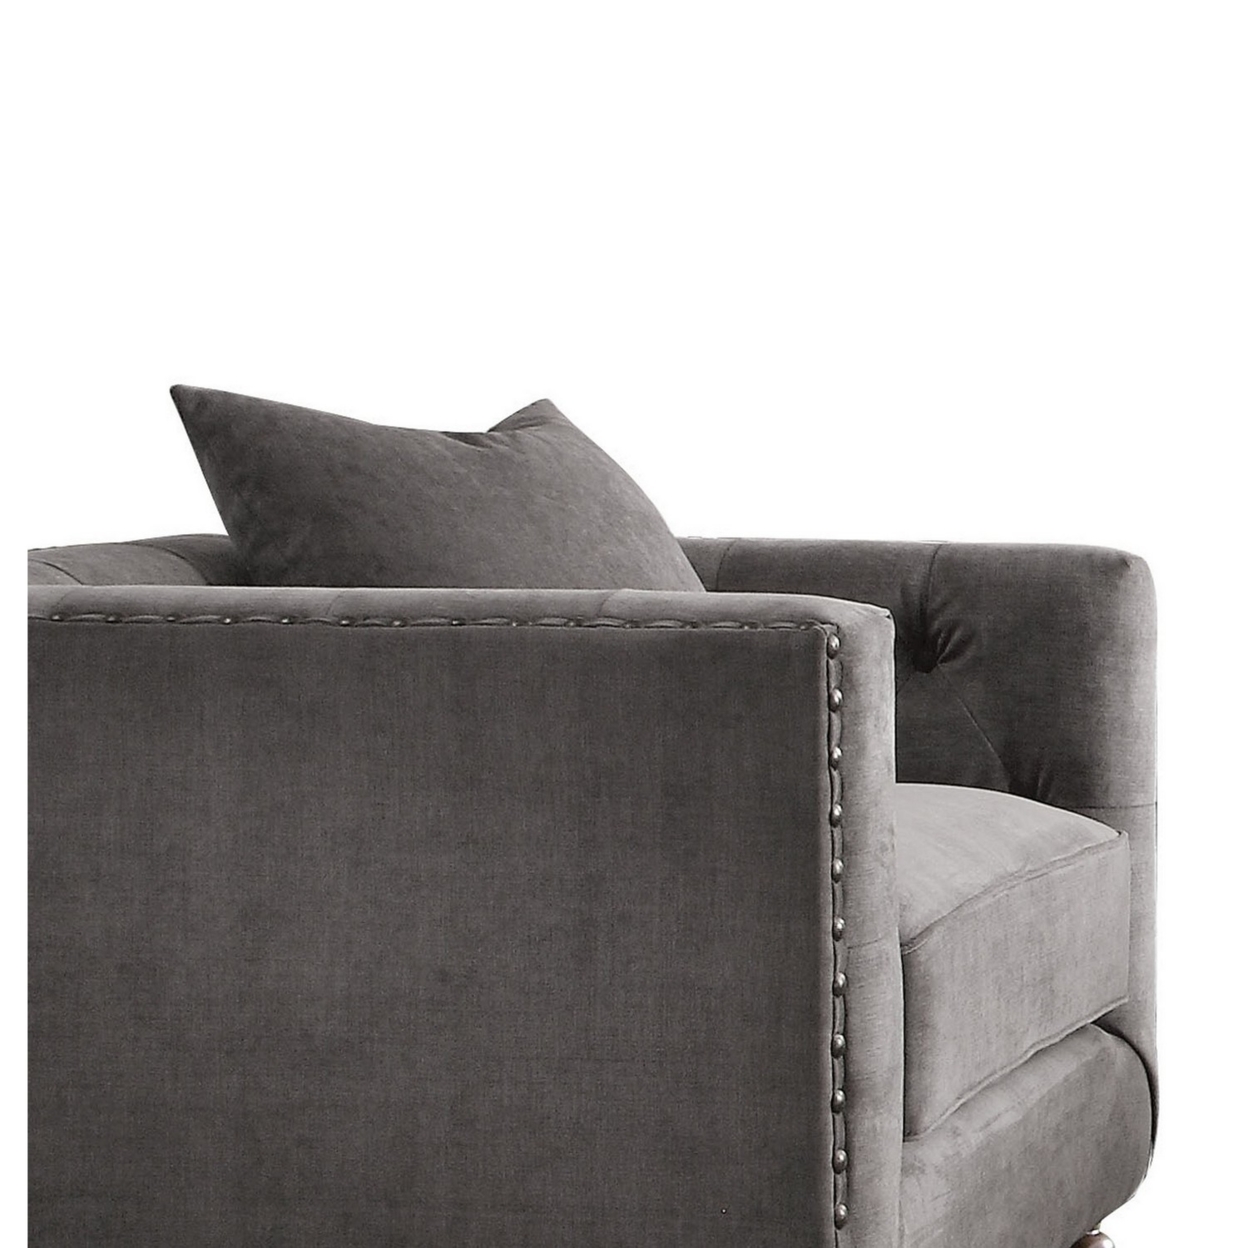 Fabric Upholstered Wooden Sofa Chair With Nail Head Trim, Gray- Saltoro Sherpi